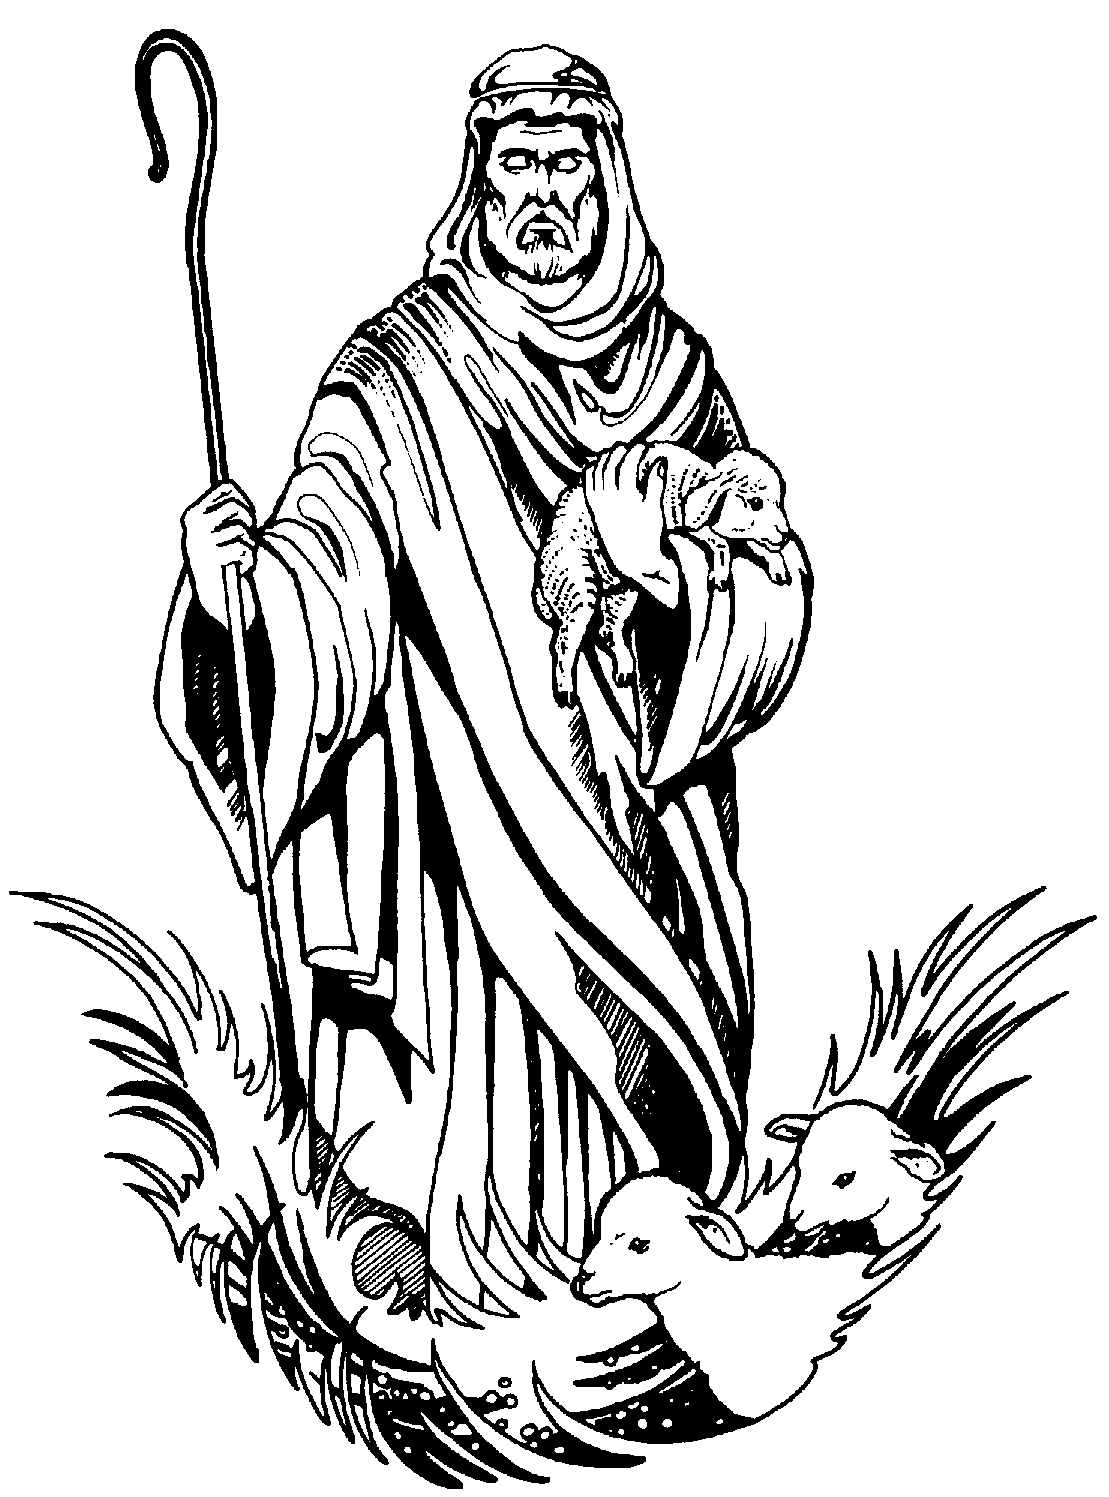 Shepherd Coloring Page   Coloring Pages   Pictures   Imagixs